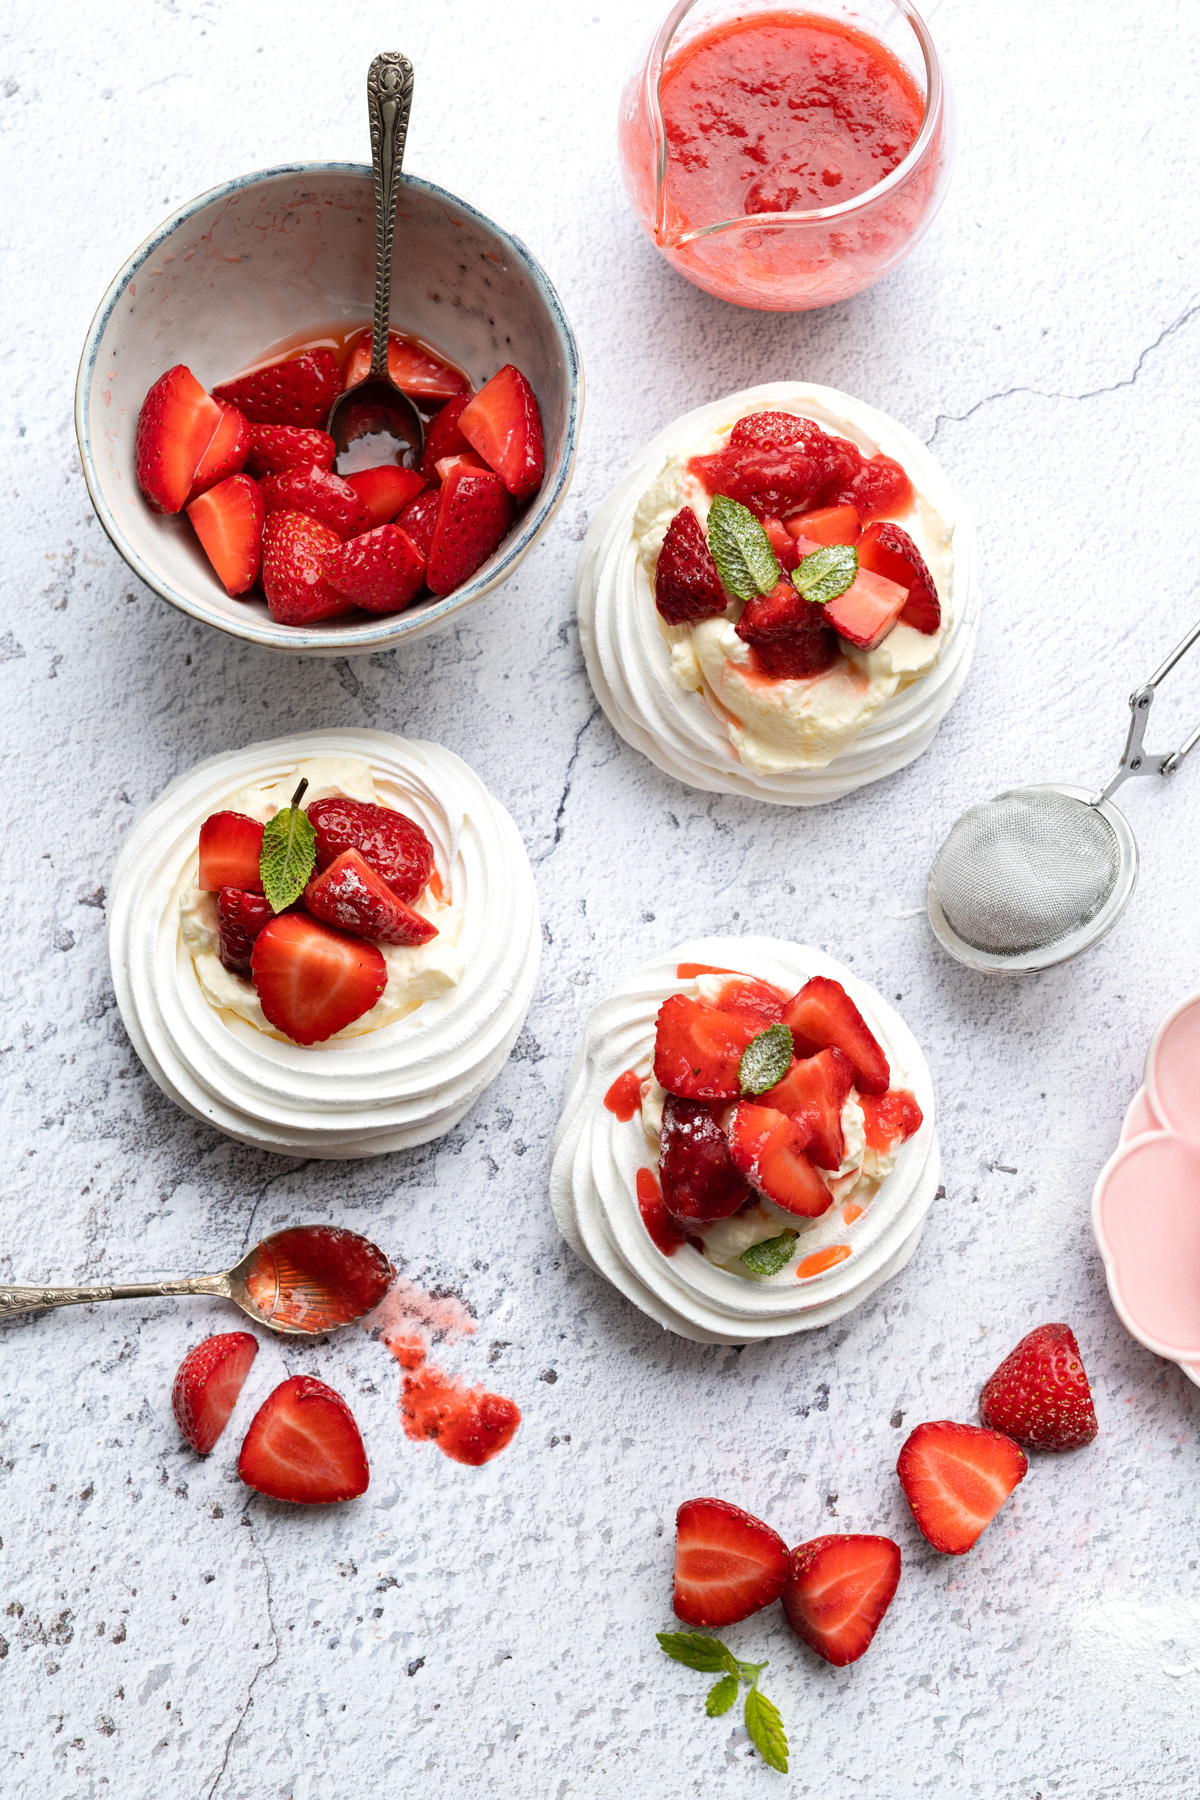 meringue nests filled with whipped cream and strawberries to make mini pavlovas